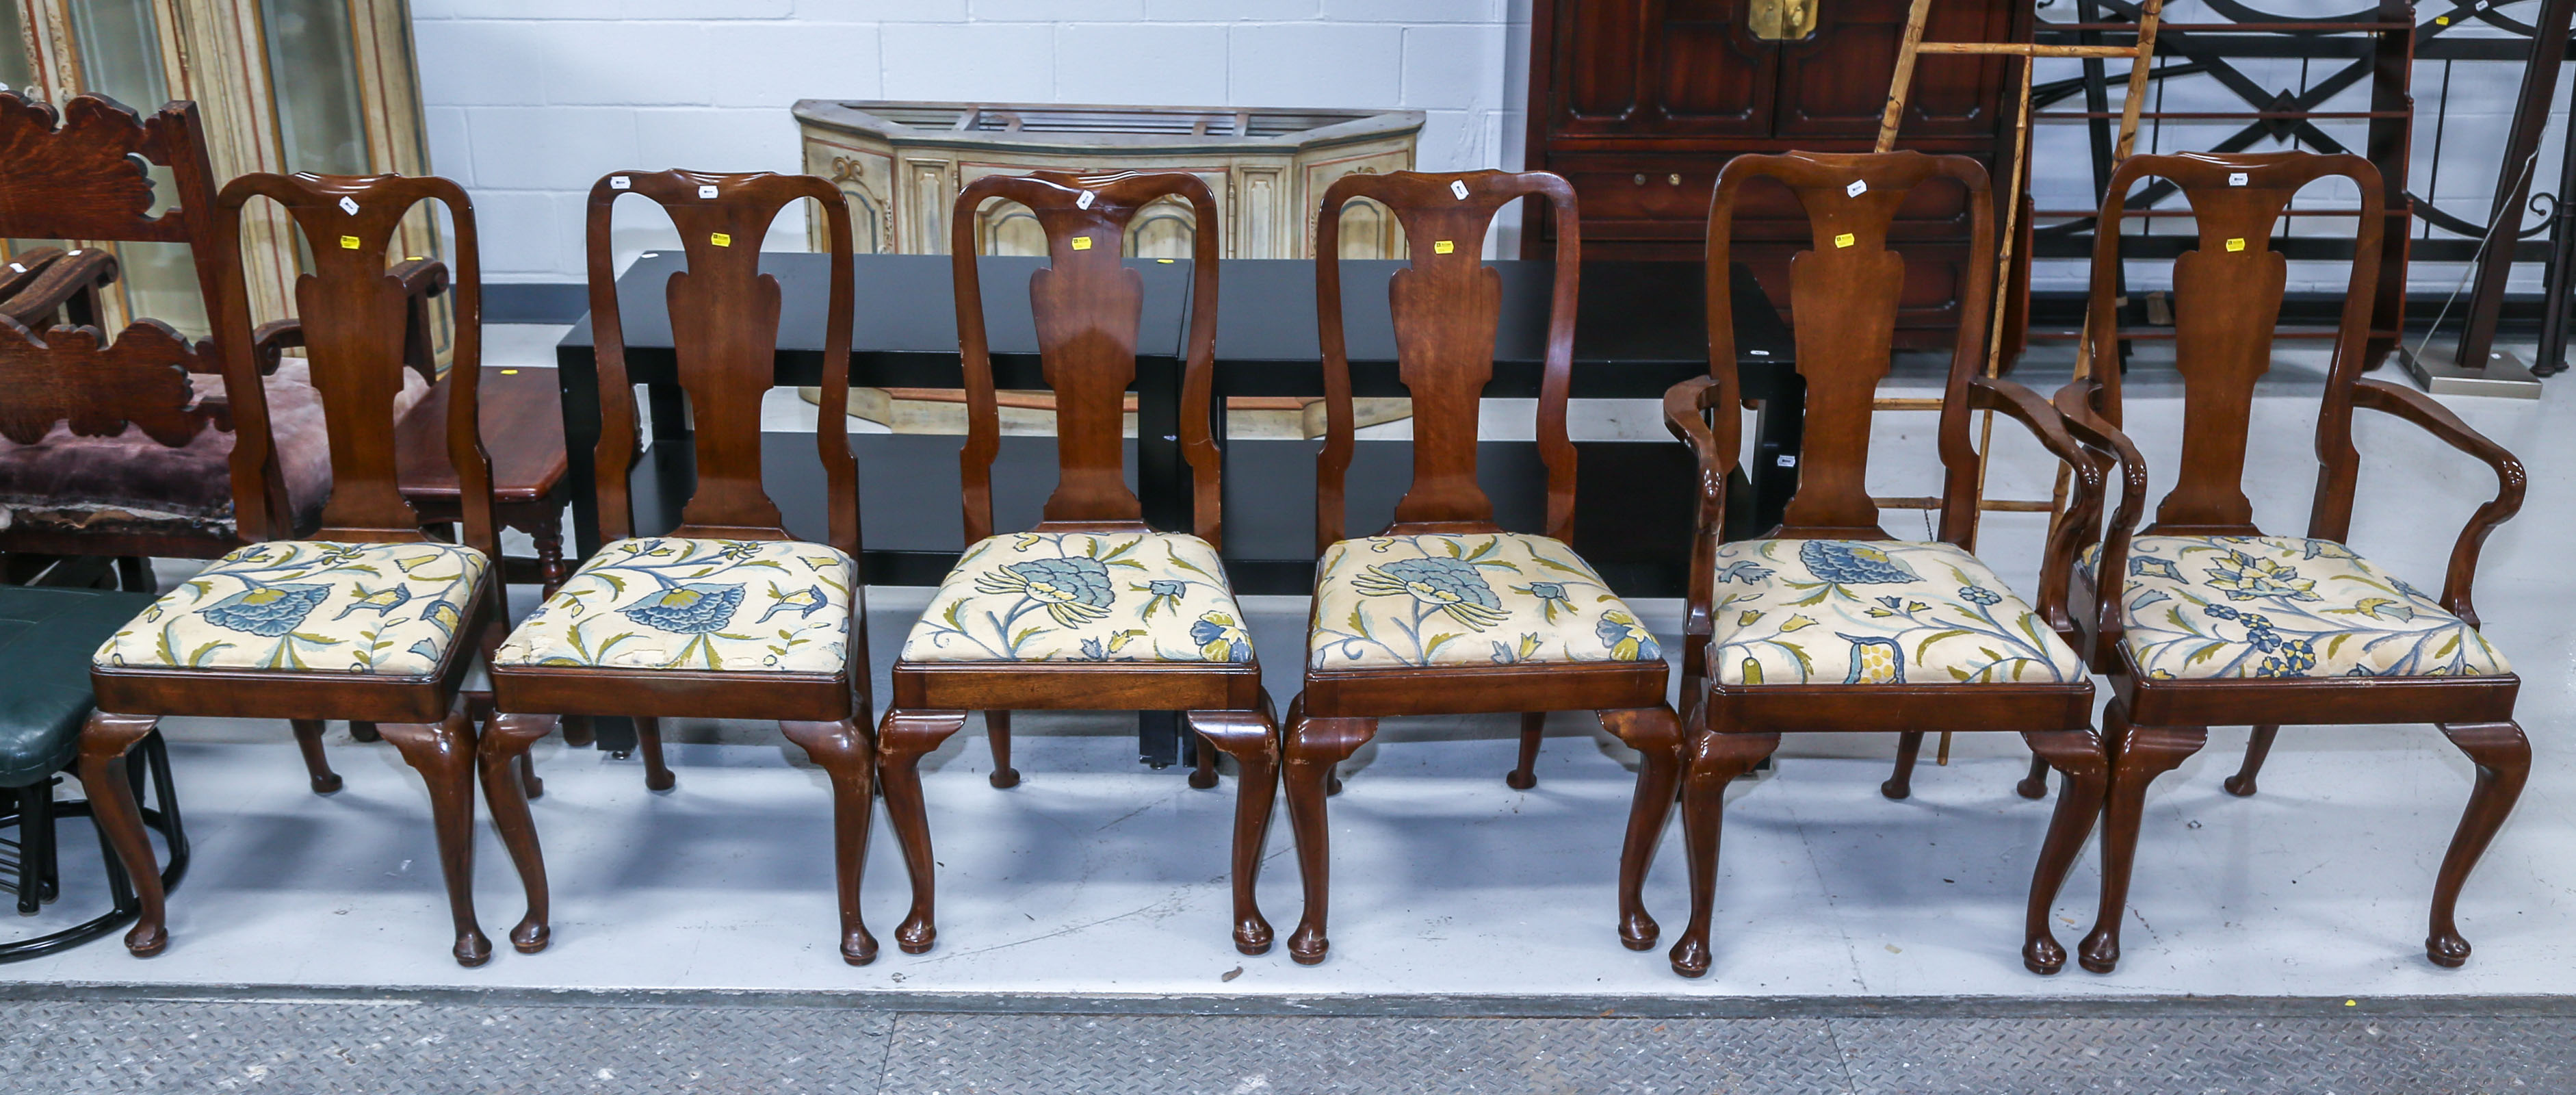 SET OF SIX QUEEN ANNE STYLE DINING 2ea918